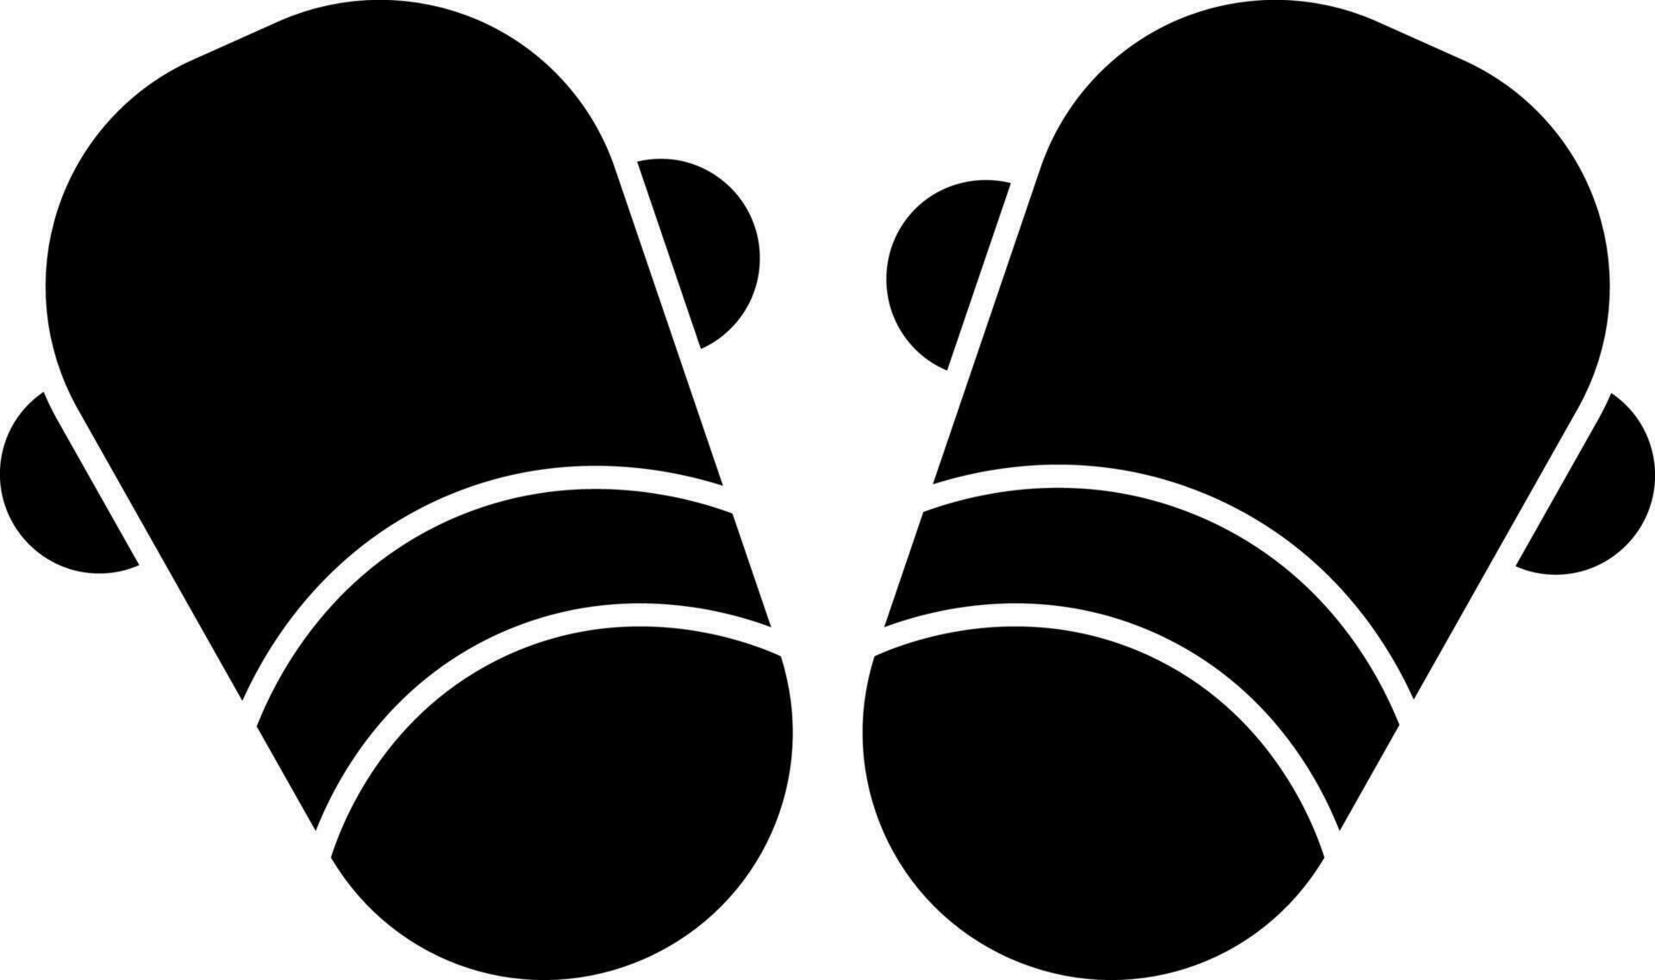 Baby Shoes Icon In Black and White Color. vector